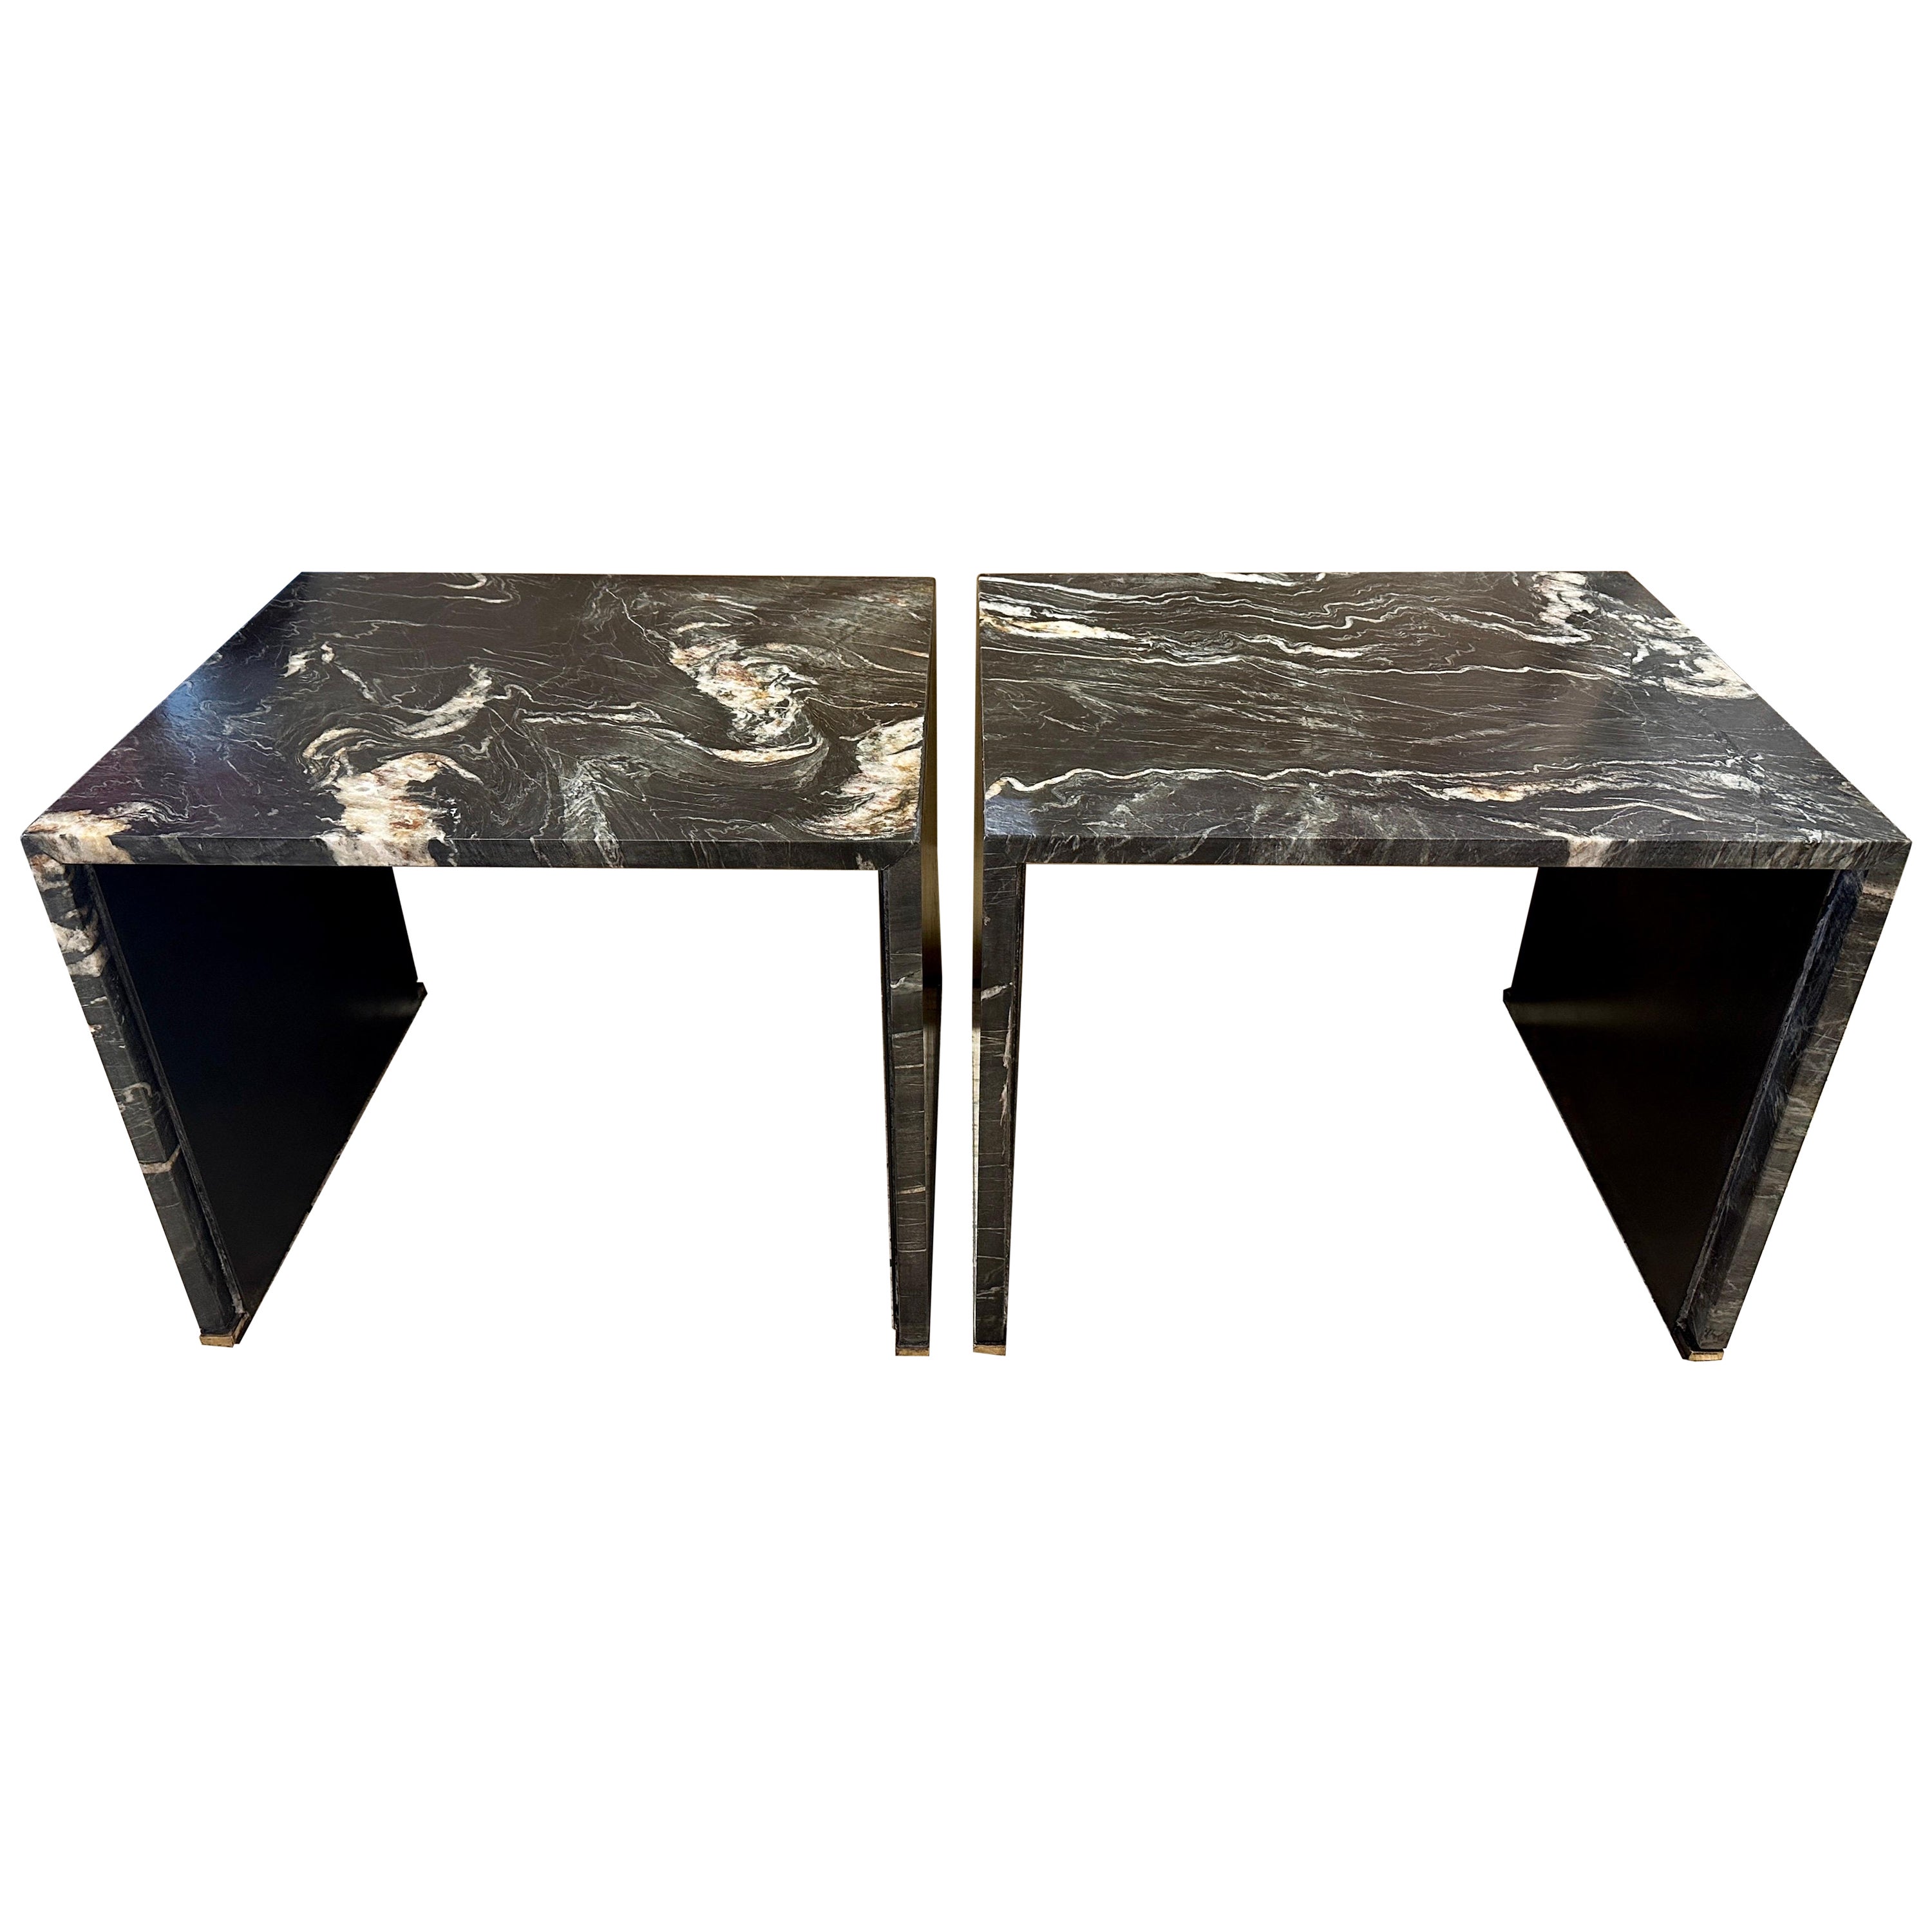 Pair of Black Belgian Marble Clad Waterfall Design End Tables / Side Tables For Sale